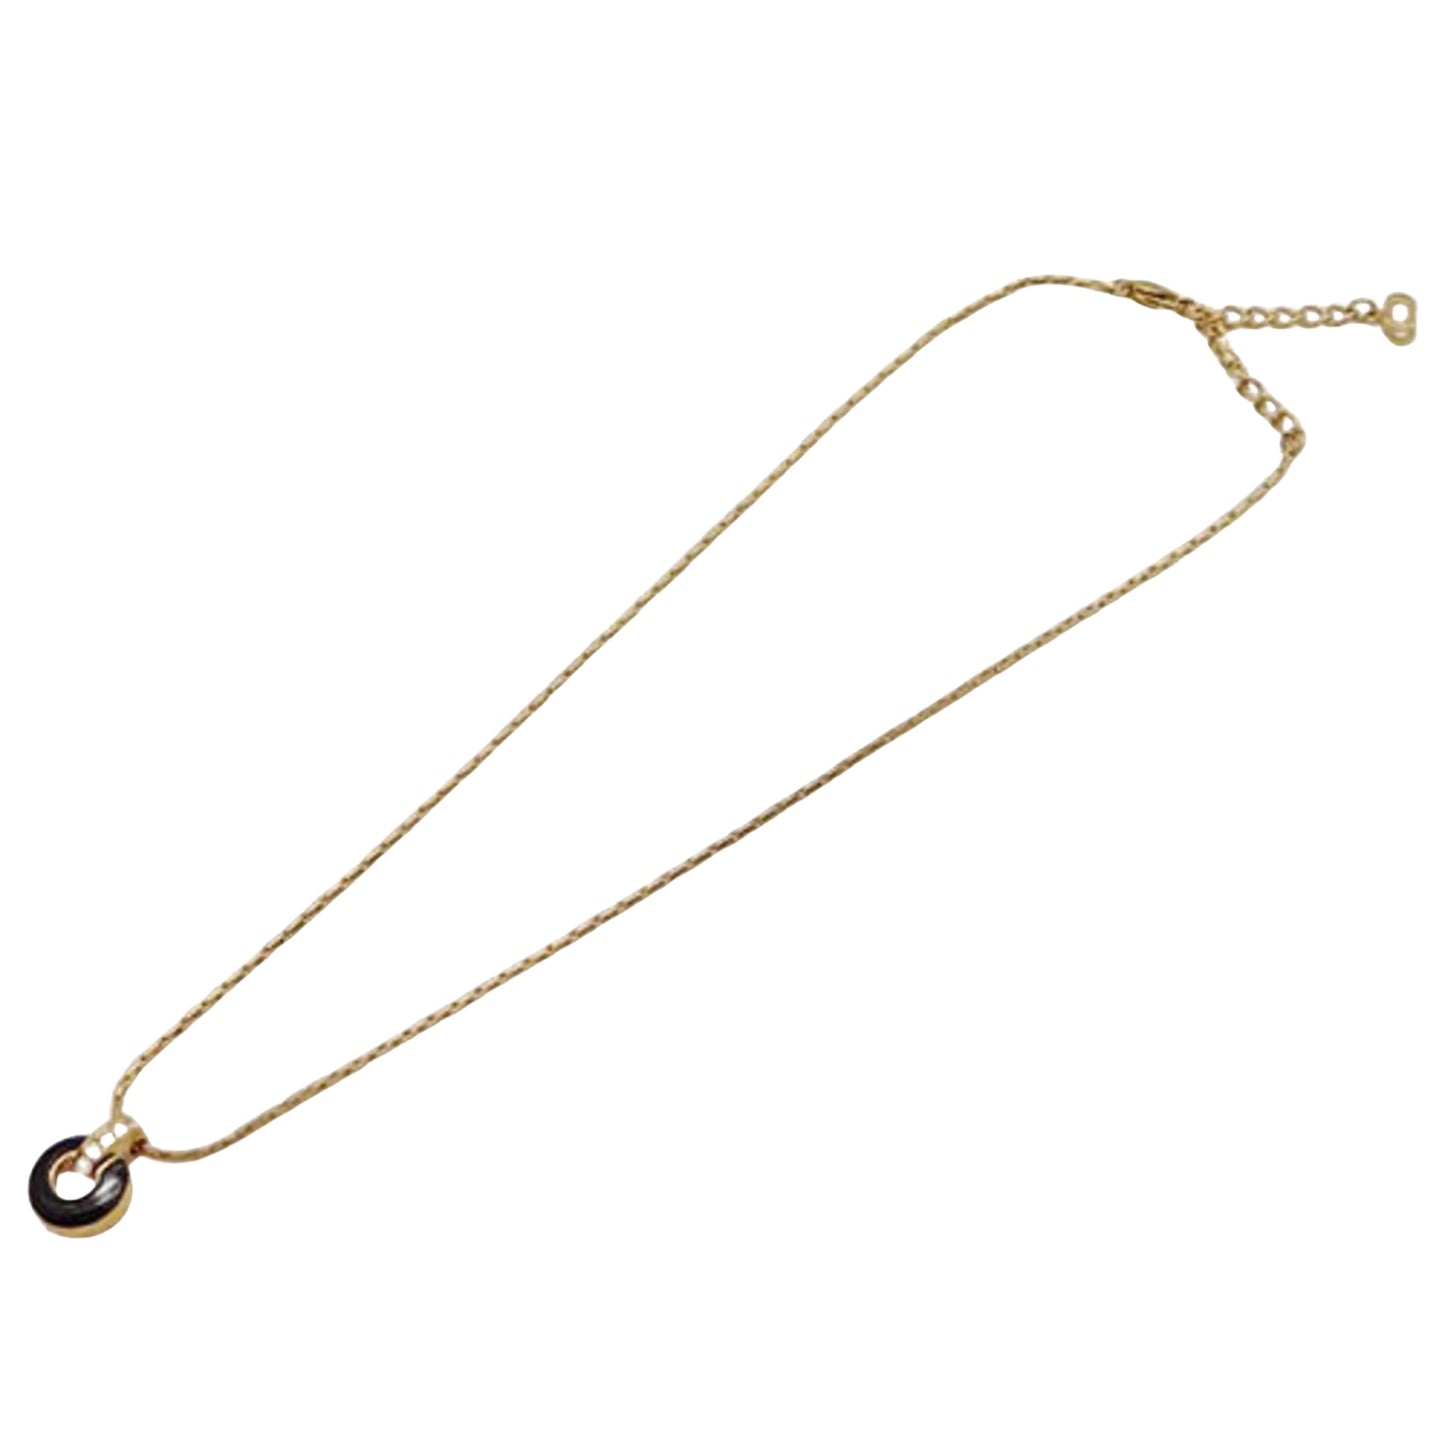 Dior Women's Gold Metal Necklace by Dior in Gold